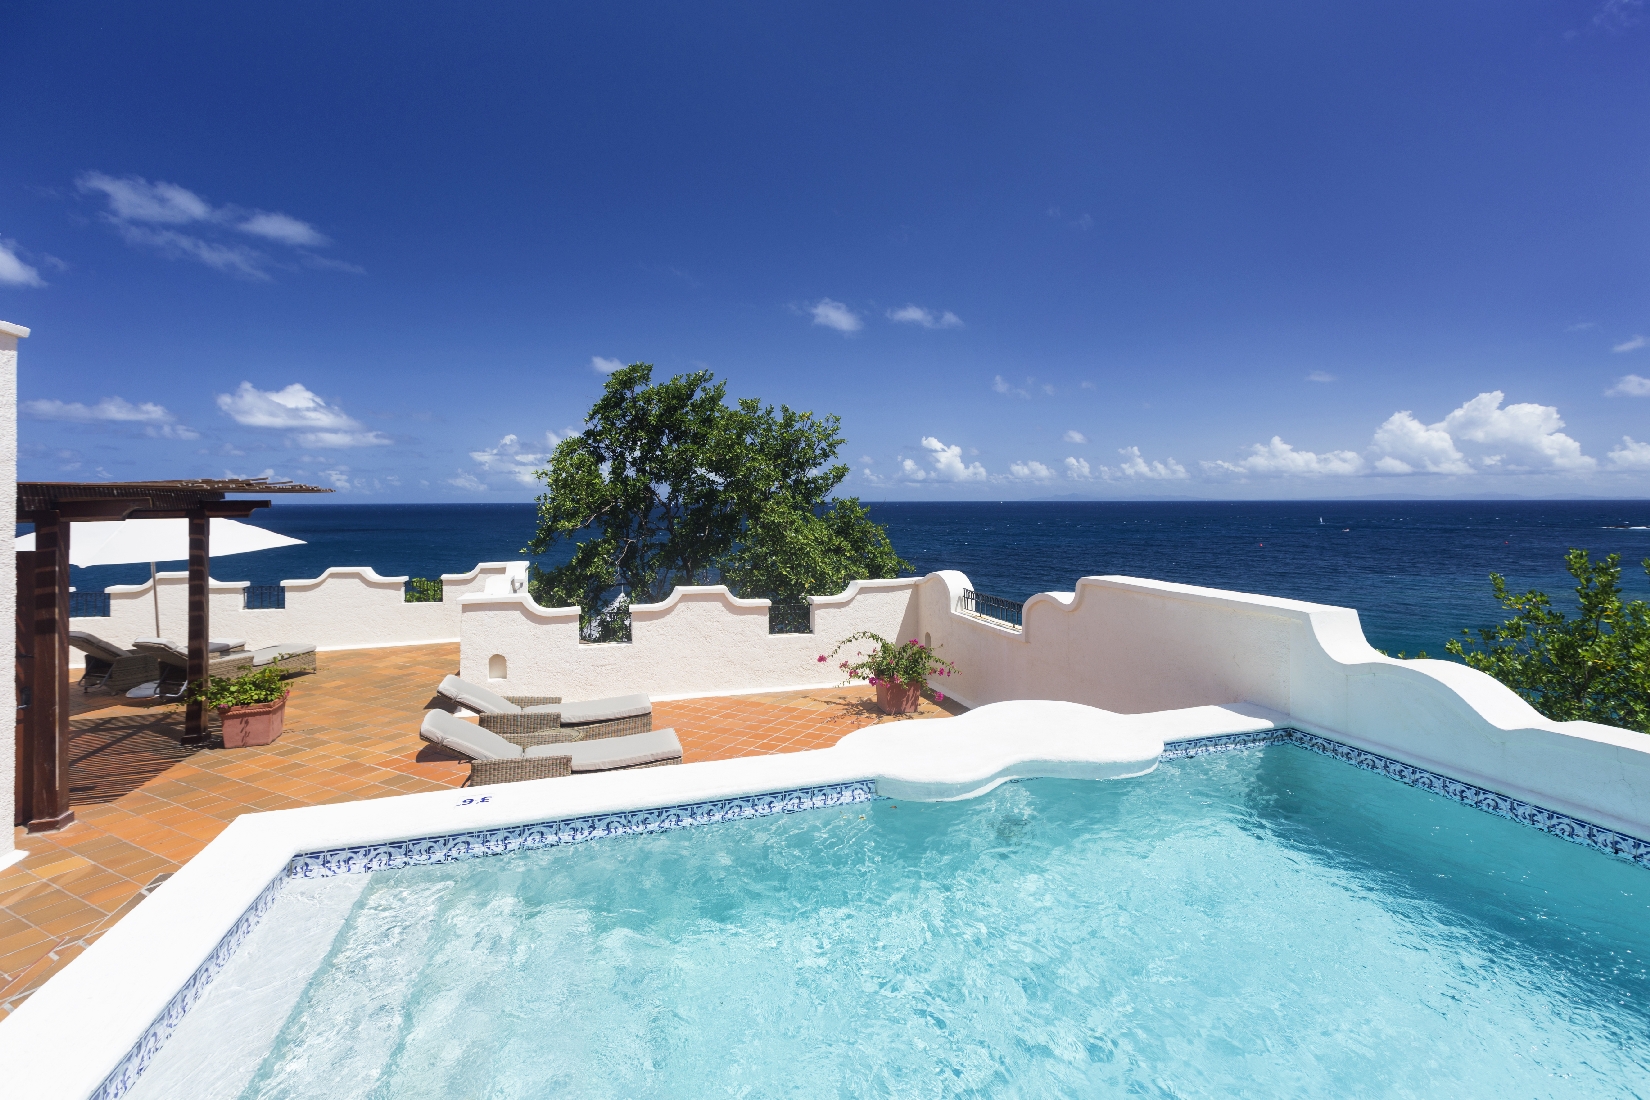 The swimming pool of an ocean view villa at Cap Maison, St. Lucia